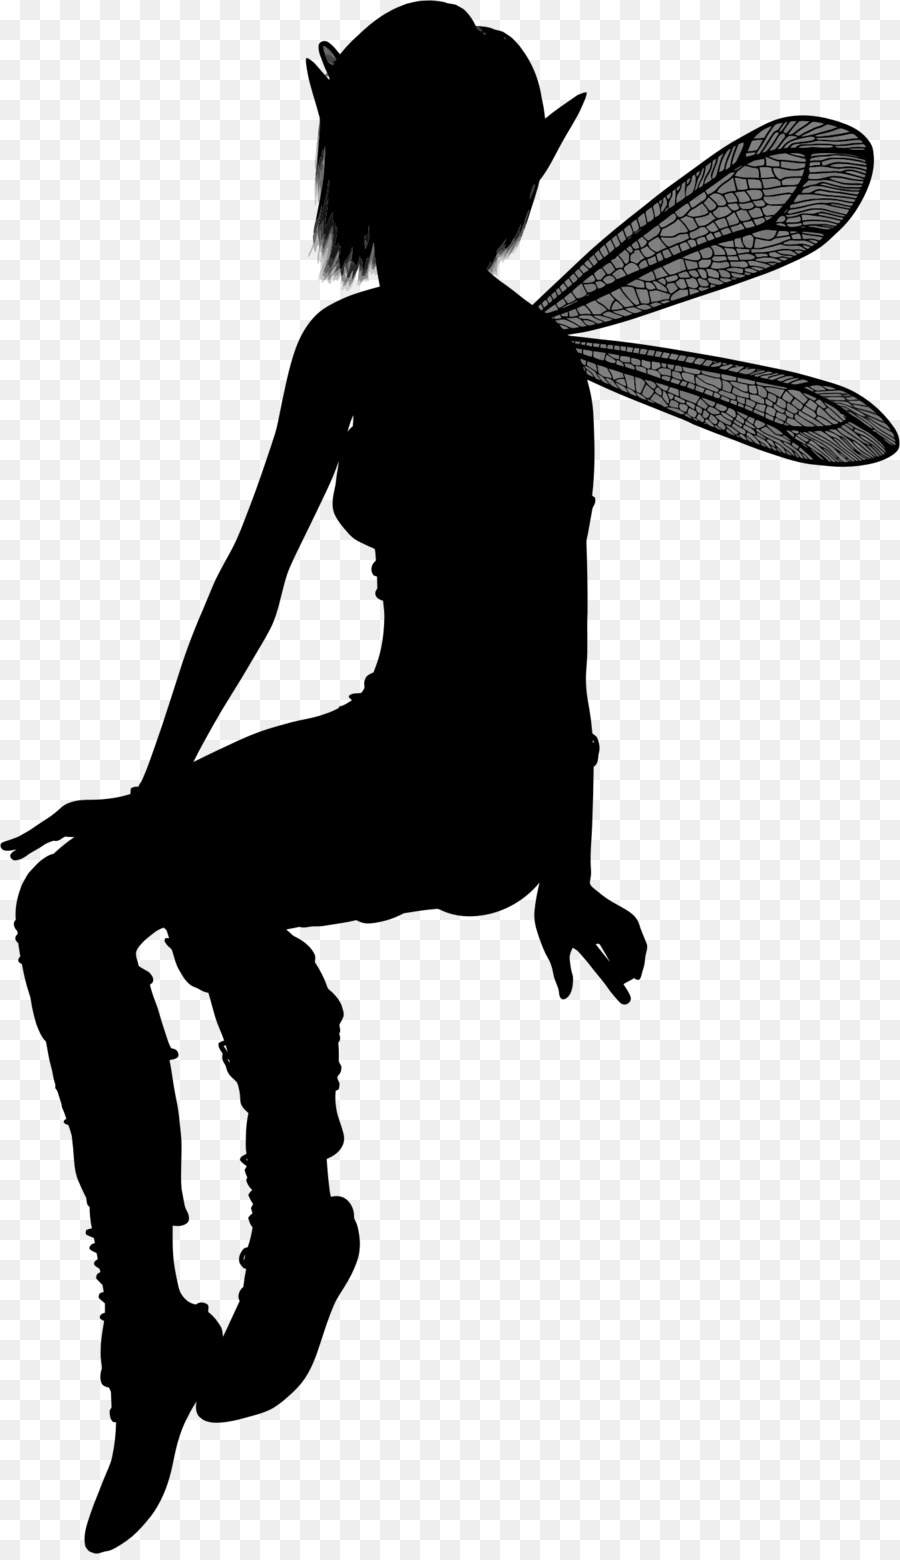 Fairy Elf Silhouette Clip art - Fairy Silhouette png download - 1352*2334 - Free Transparent Fairy png Download.